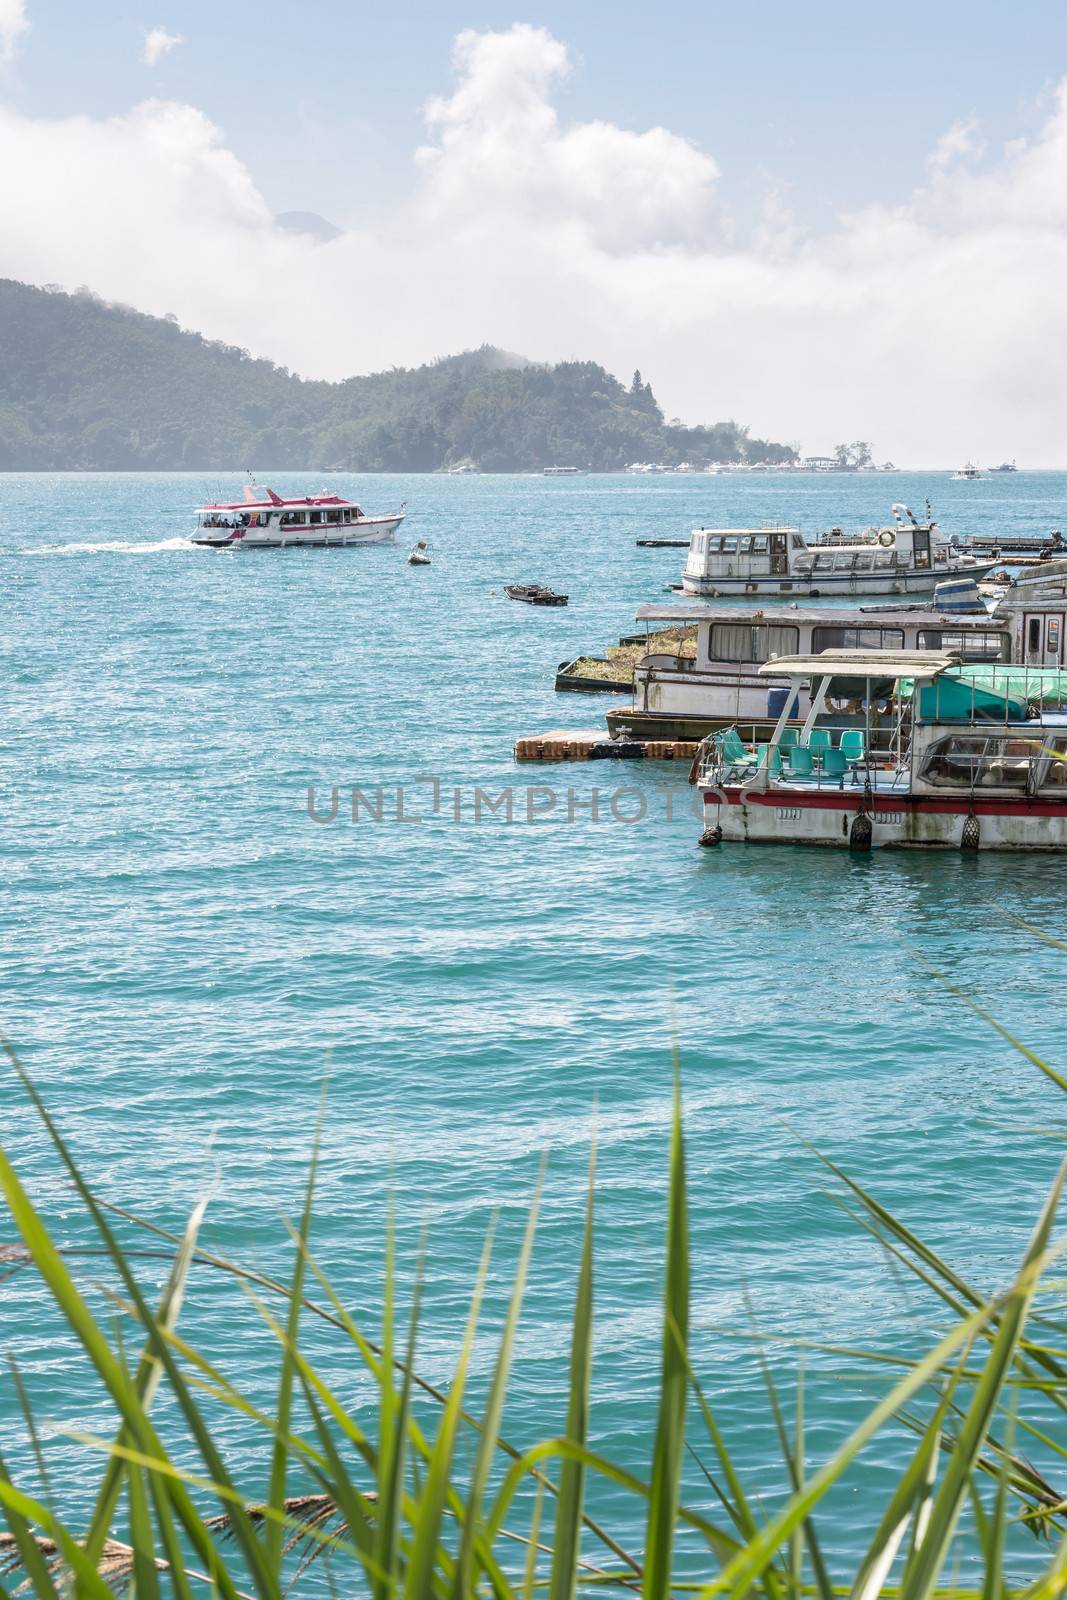 Landscape of famous attraction, Sun Moon Lake at Taiwan, with boats on dock at sunny day.